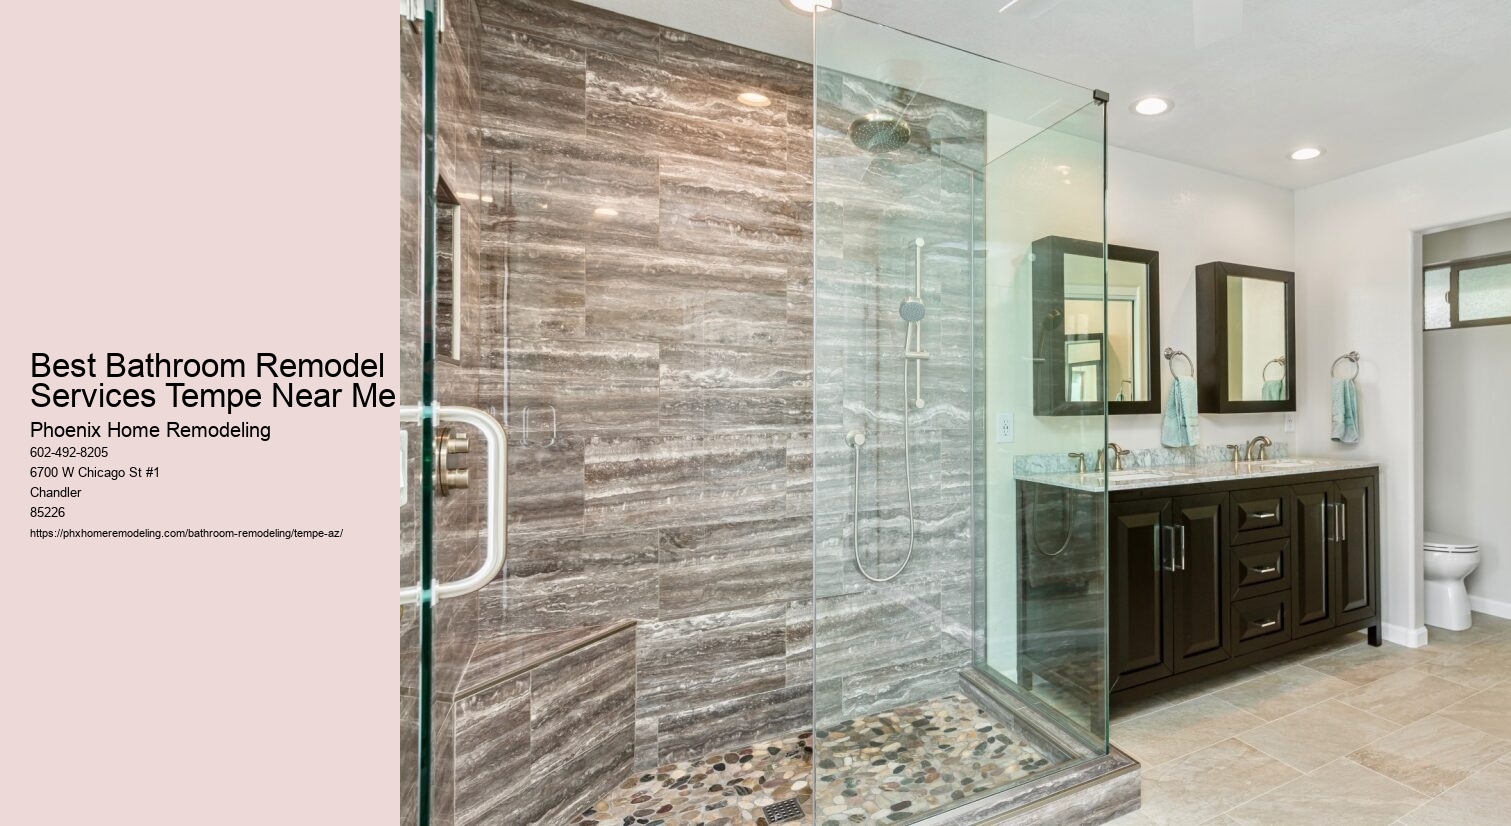 Best Bathroom Remodel Services Tempe Near Me